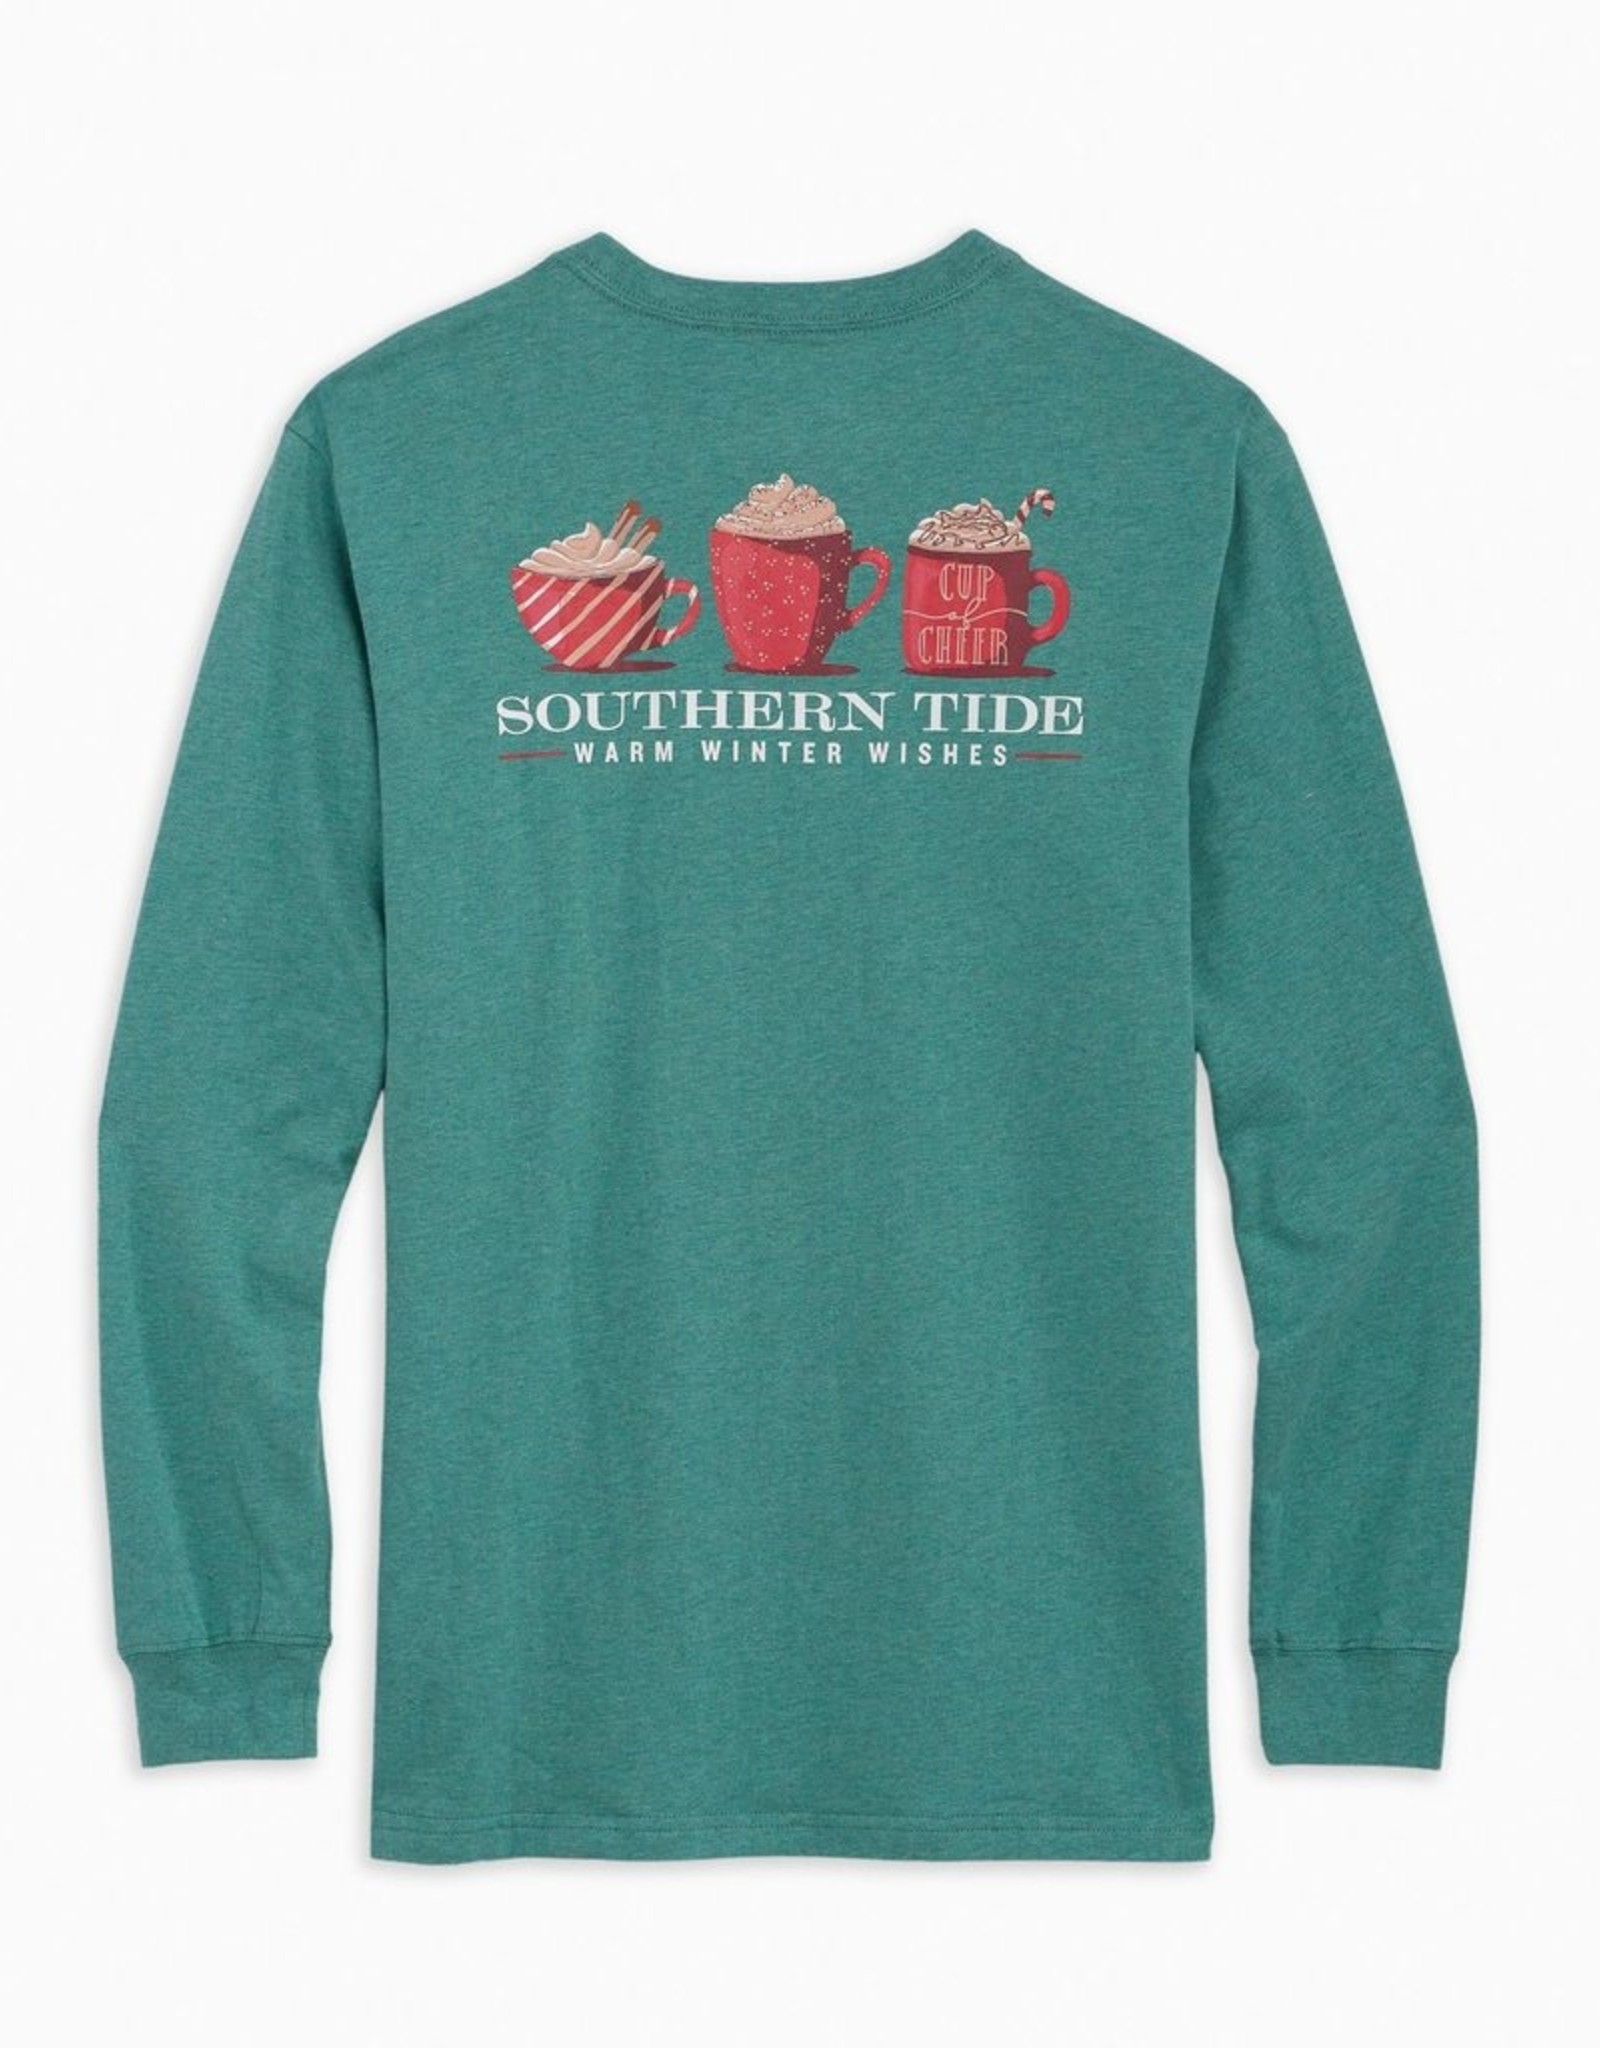 Southern Tide Winter Wishes Long Sleeve Tee